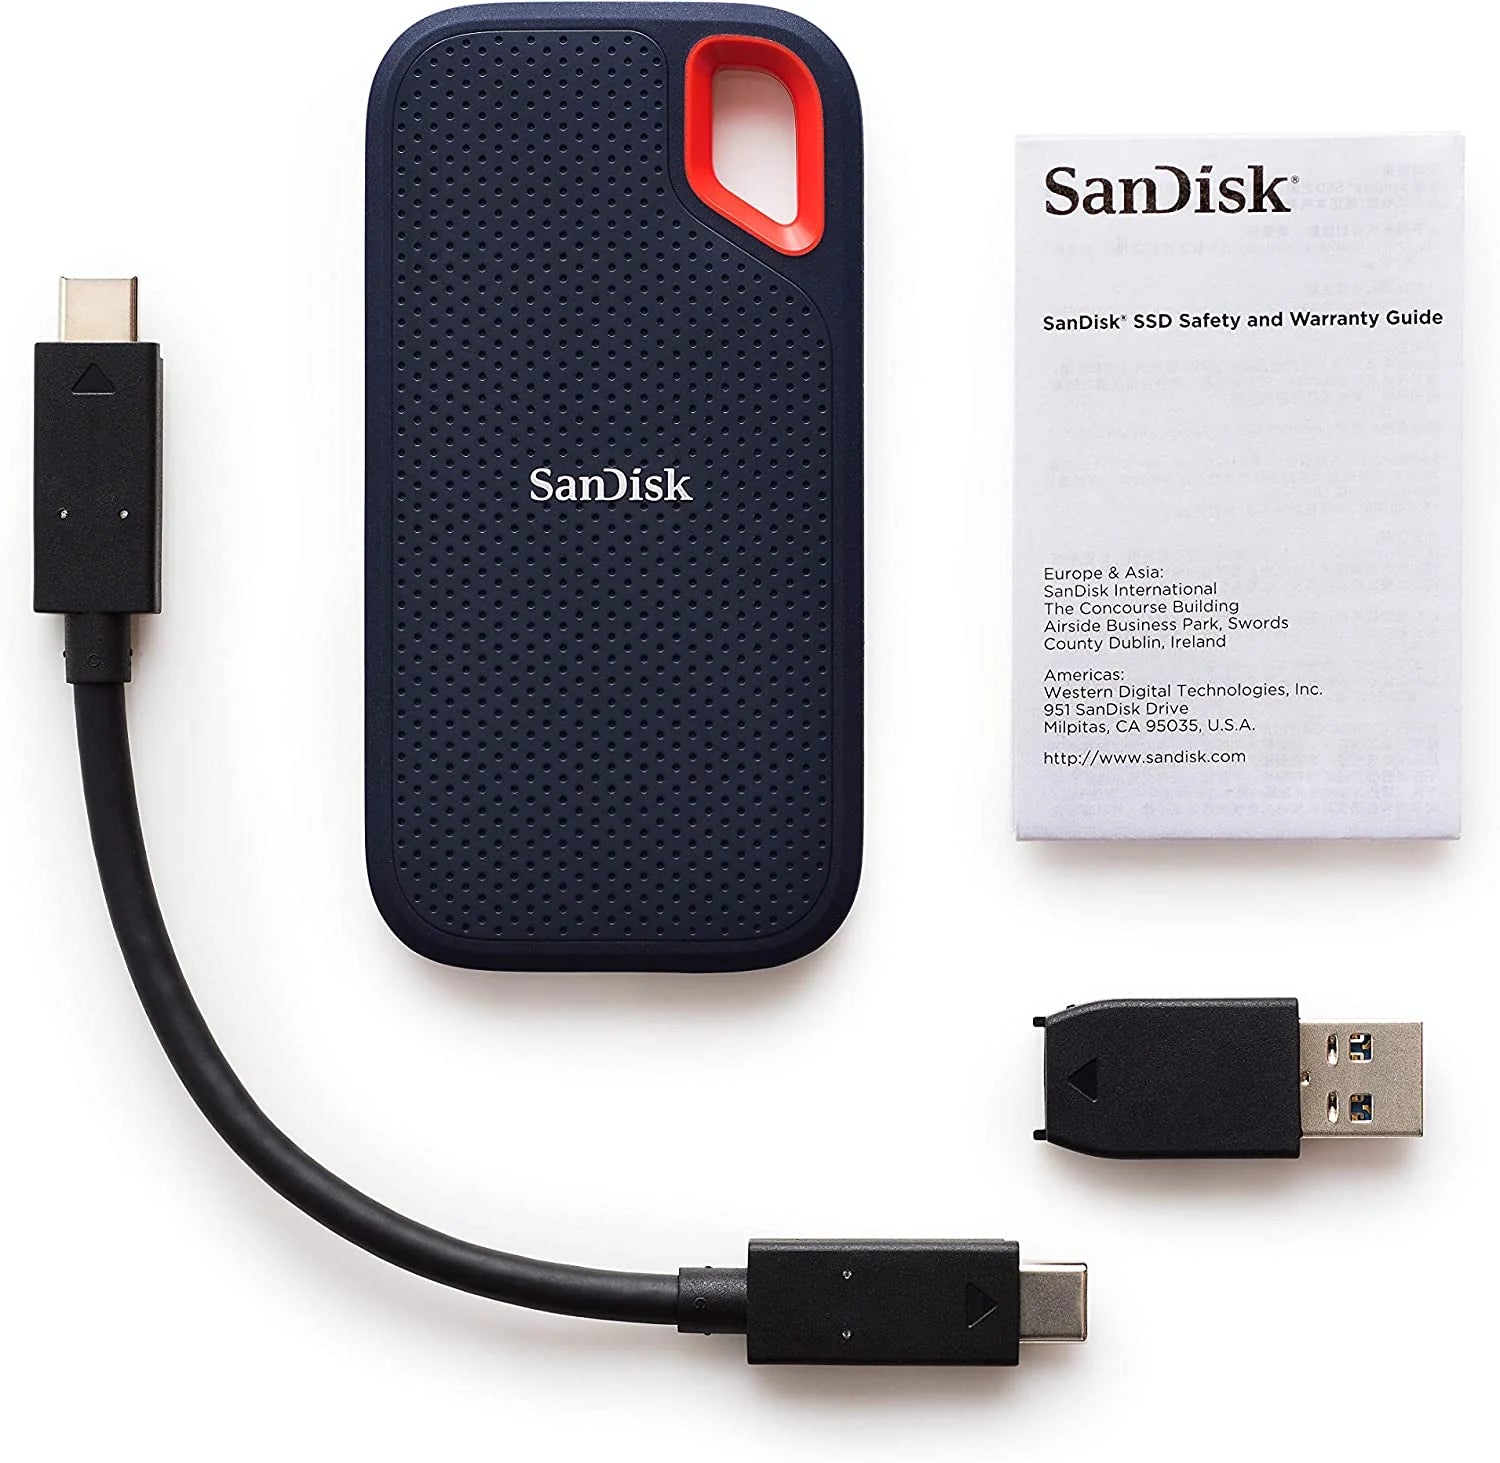 Sandisk extreme portable SSD 2tb